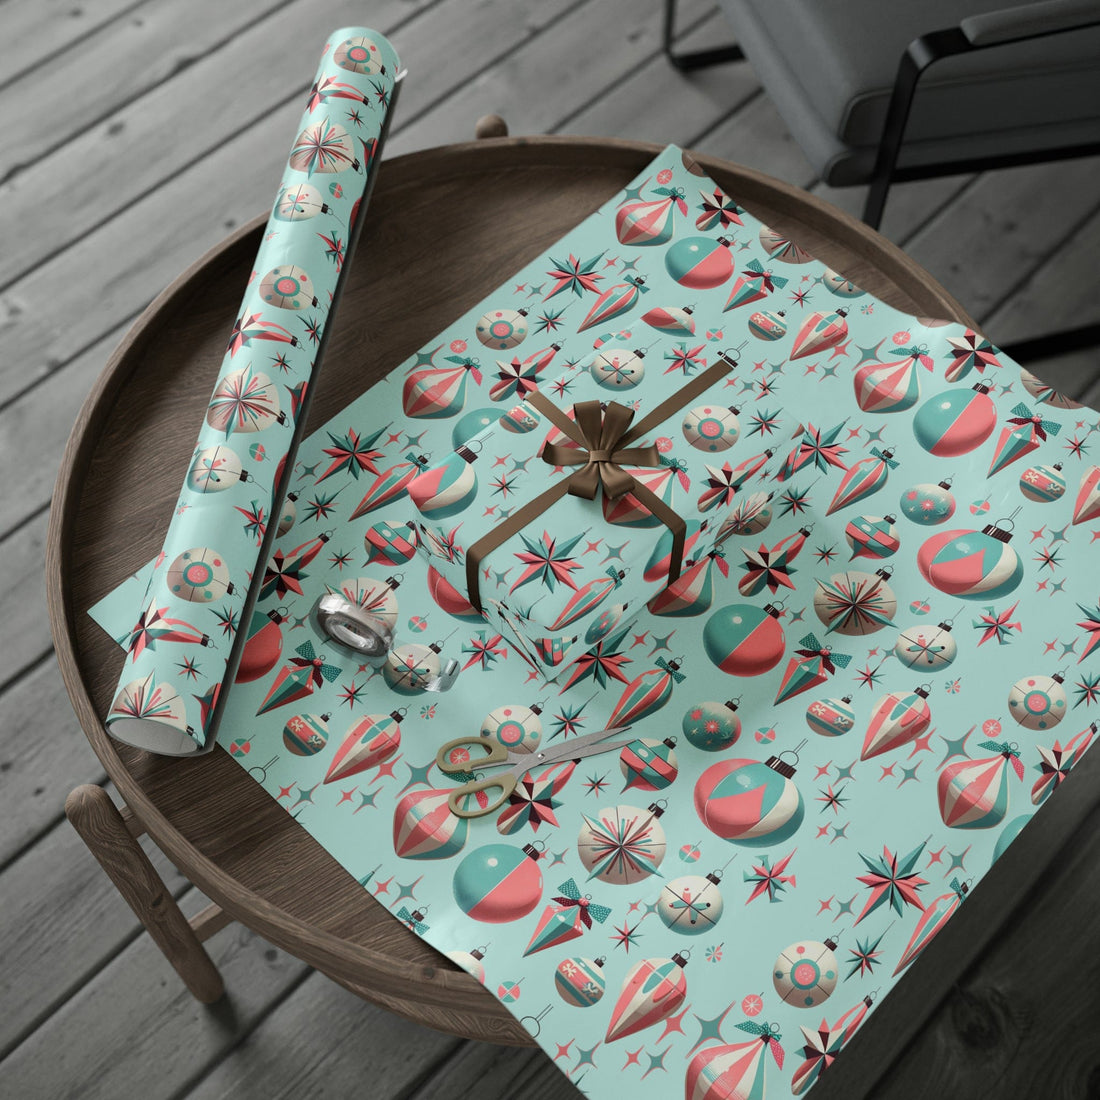 Shiny Brite Ornament Mid Century Modern Christmas Wrapping Papers In Aqua Blue, Pink, 50&